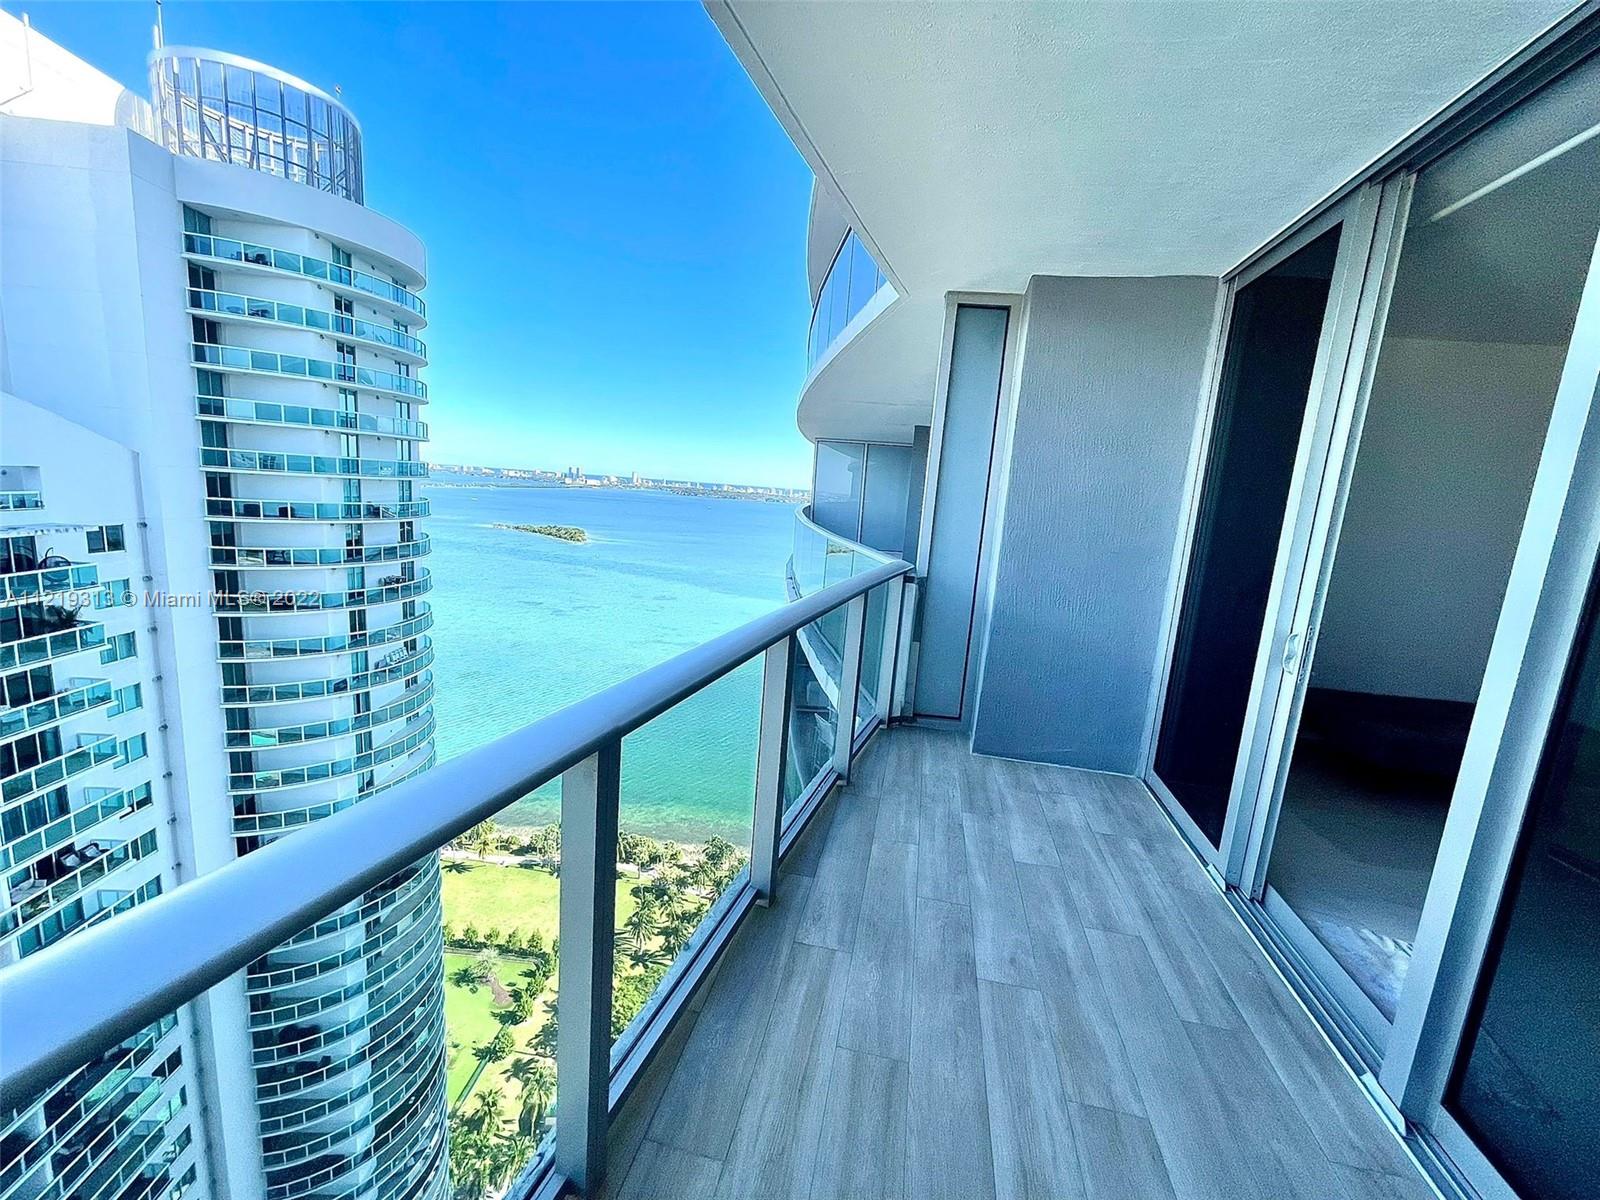 Luxurious Brand New Condo with Spacious 1 Bedroom + 1 Den / 2 Full Bath, a large balcony overlooking the ocean and city and porcelain floors. Den has been enclosed as a second bedroom and a spacious closet added. Aria is a new building with spectacular views, amenities and a beautiful park across the street. Unit has ceramic floors, kitchen with top of the line appliances, Built In Closets and blackouts and solar shades. One assigned parking space, two pools, gym, valet parking and nicely appointed party rooms.